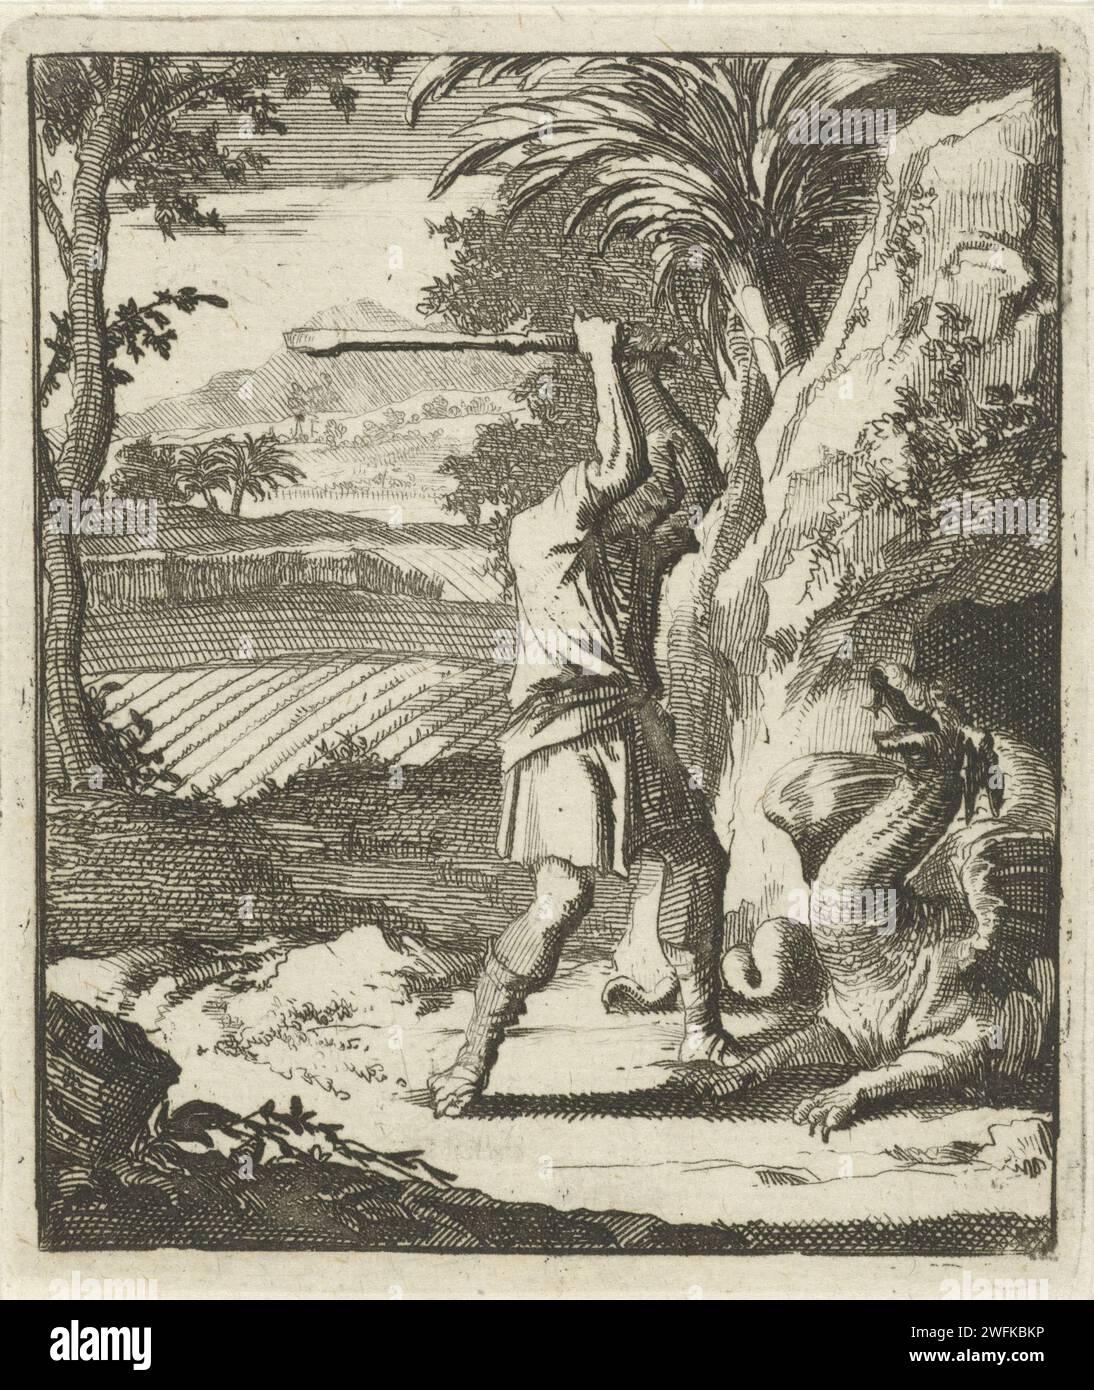 Man fights a dragon that has emerged from his cave, Jan Luyken, 1693 print  Amsterdam paper etching dragon. man killing animal Stock Photo